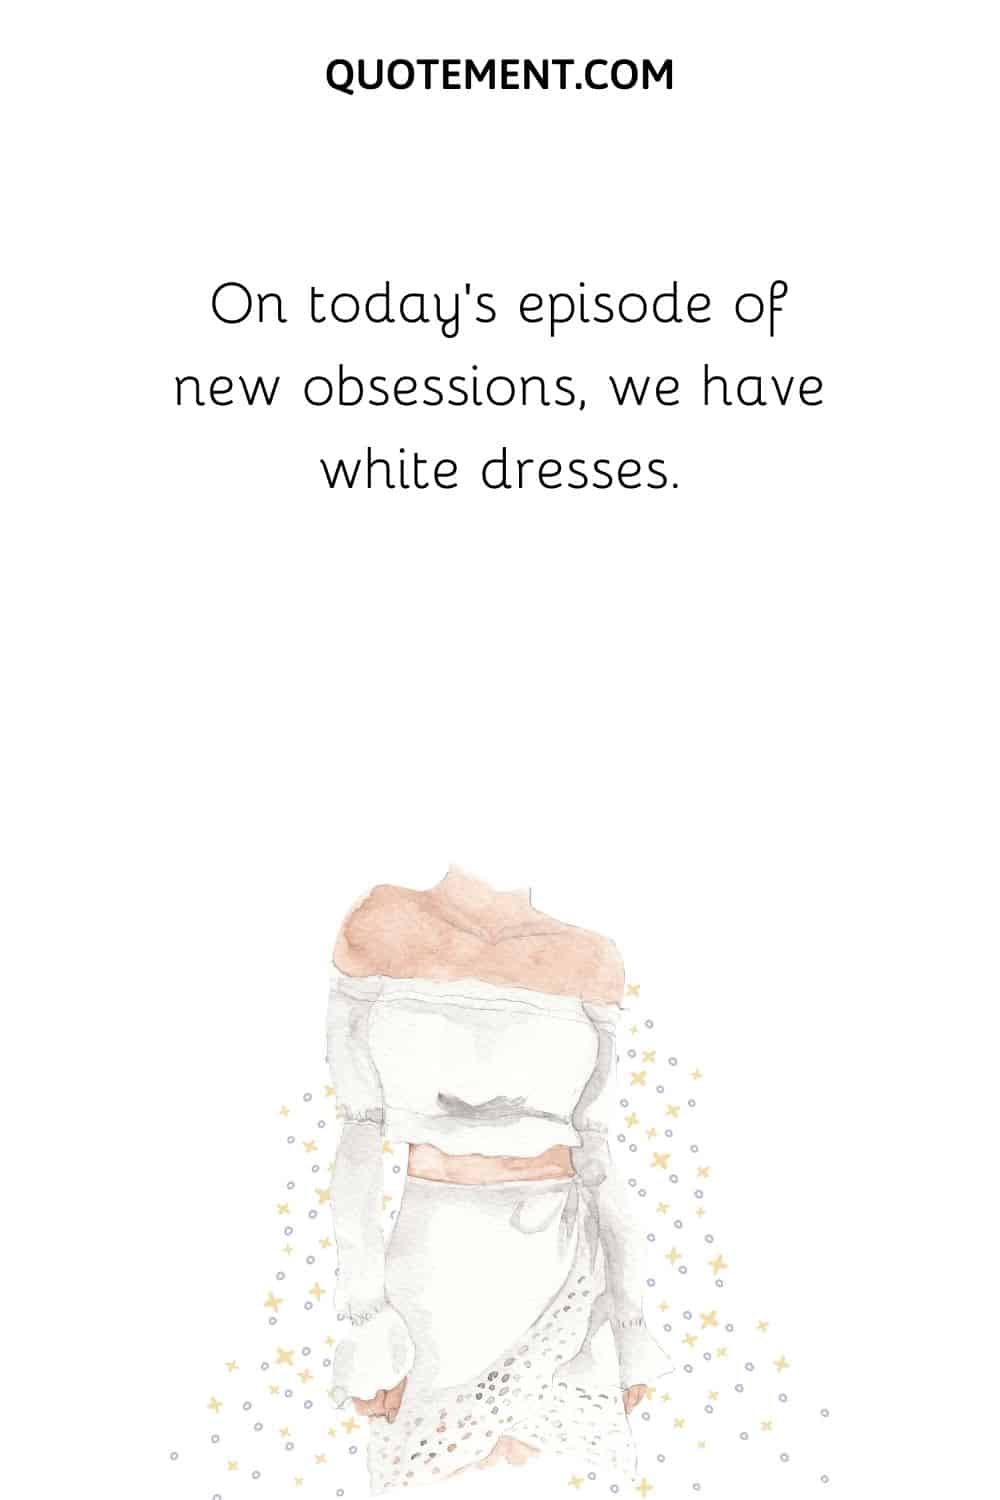 110 Perfect Dreamy White Outfit Captions For Instagram